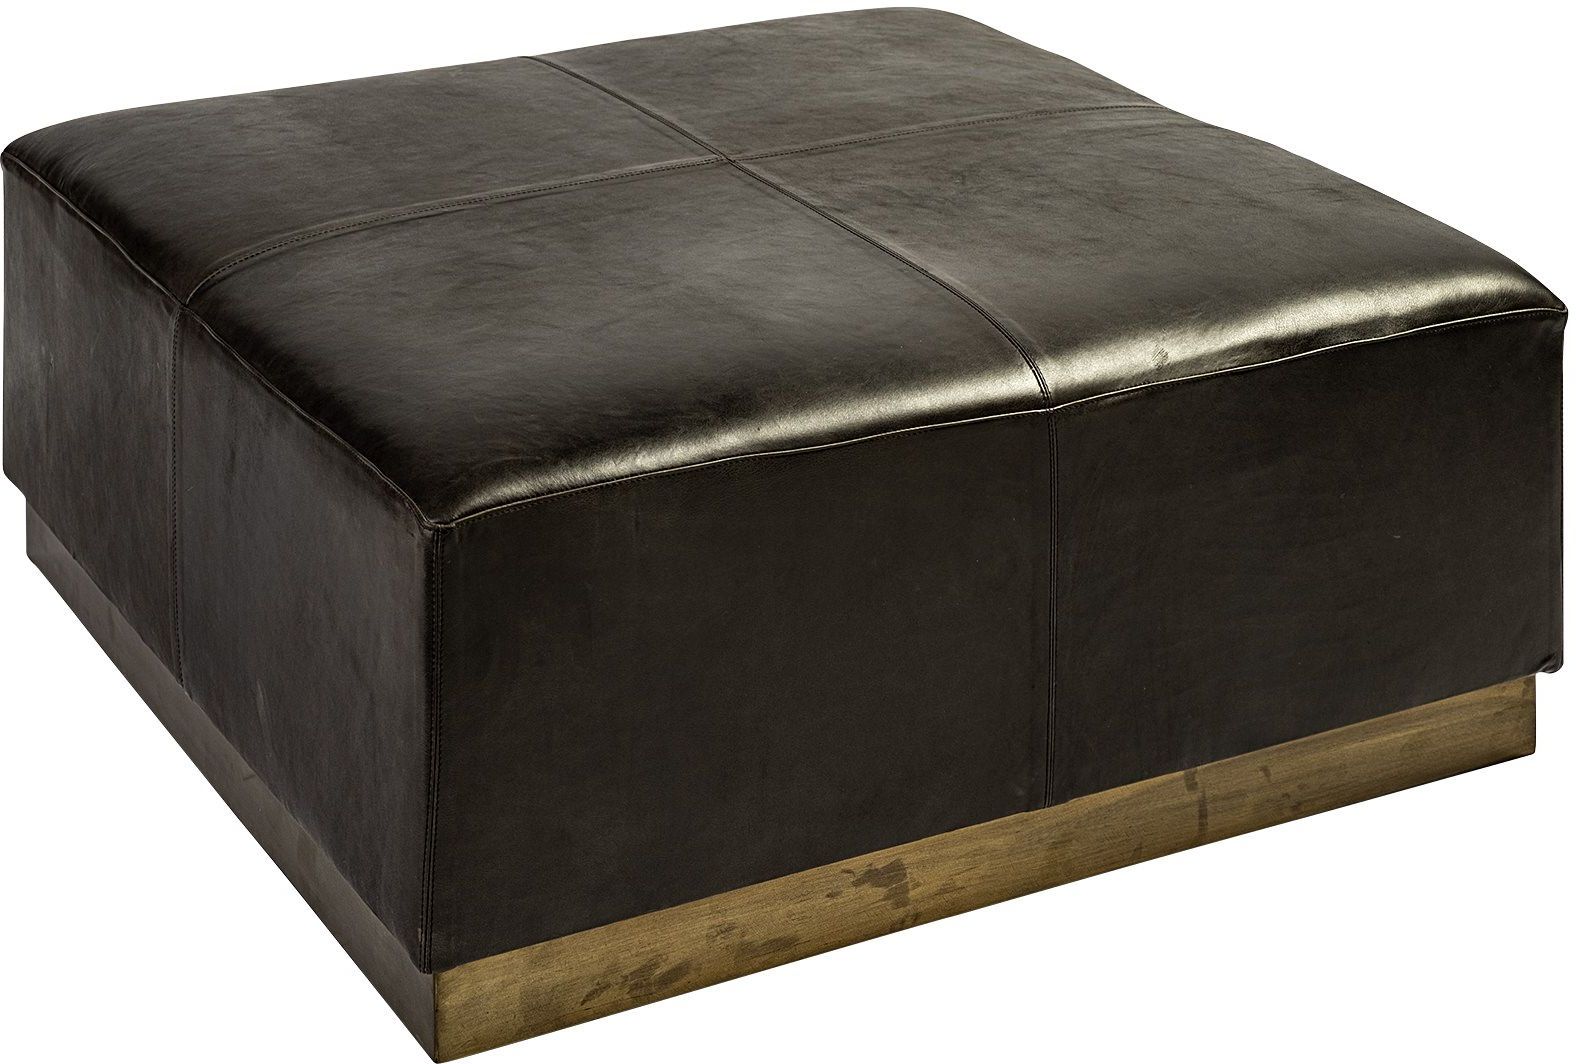 Black Leather Wrapped Ottomans Regarding Most Popular Mercana Minara Ottoman (square Black Leather Wrapped With Metal Base) –   (View 3 of 15)